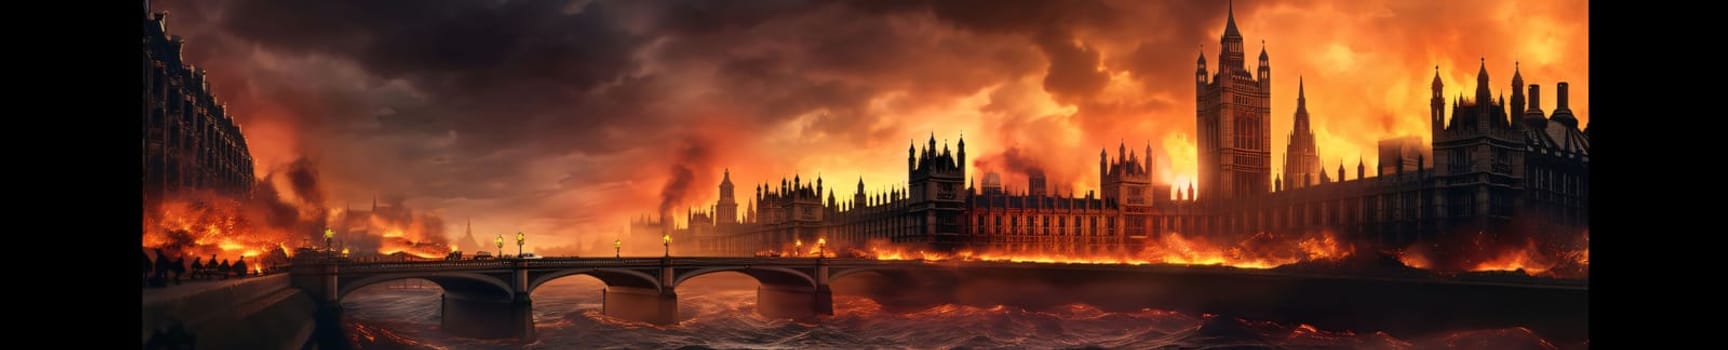 Banner: Big Ben and Houses of Parliament in a fire, London, UK